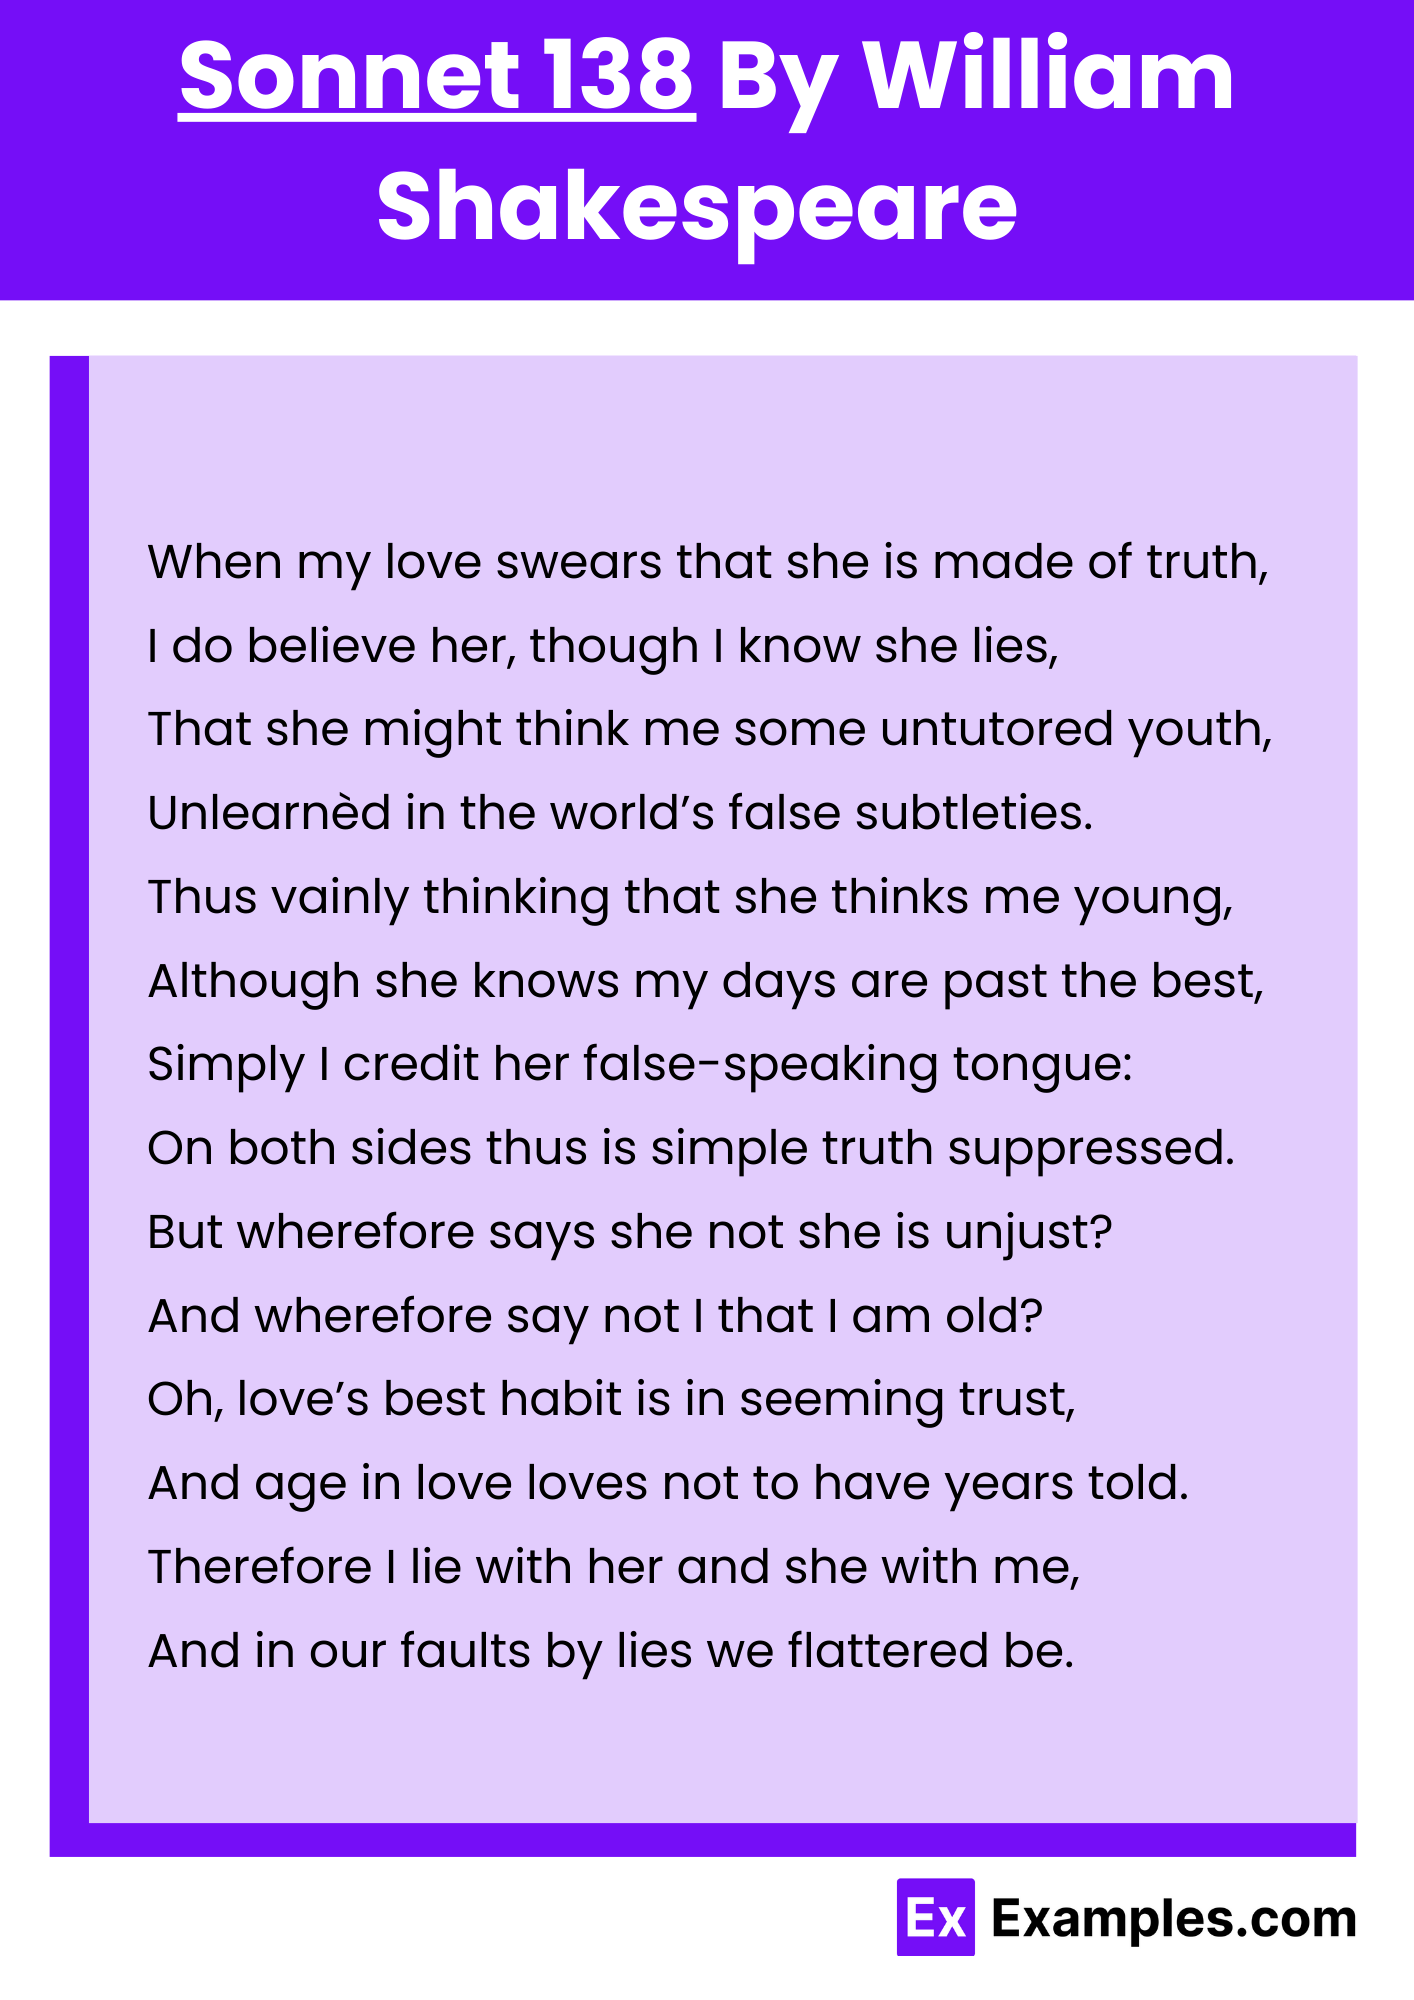 Sonnet 138 By William Shakespeare